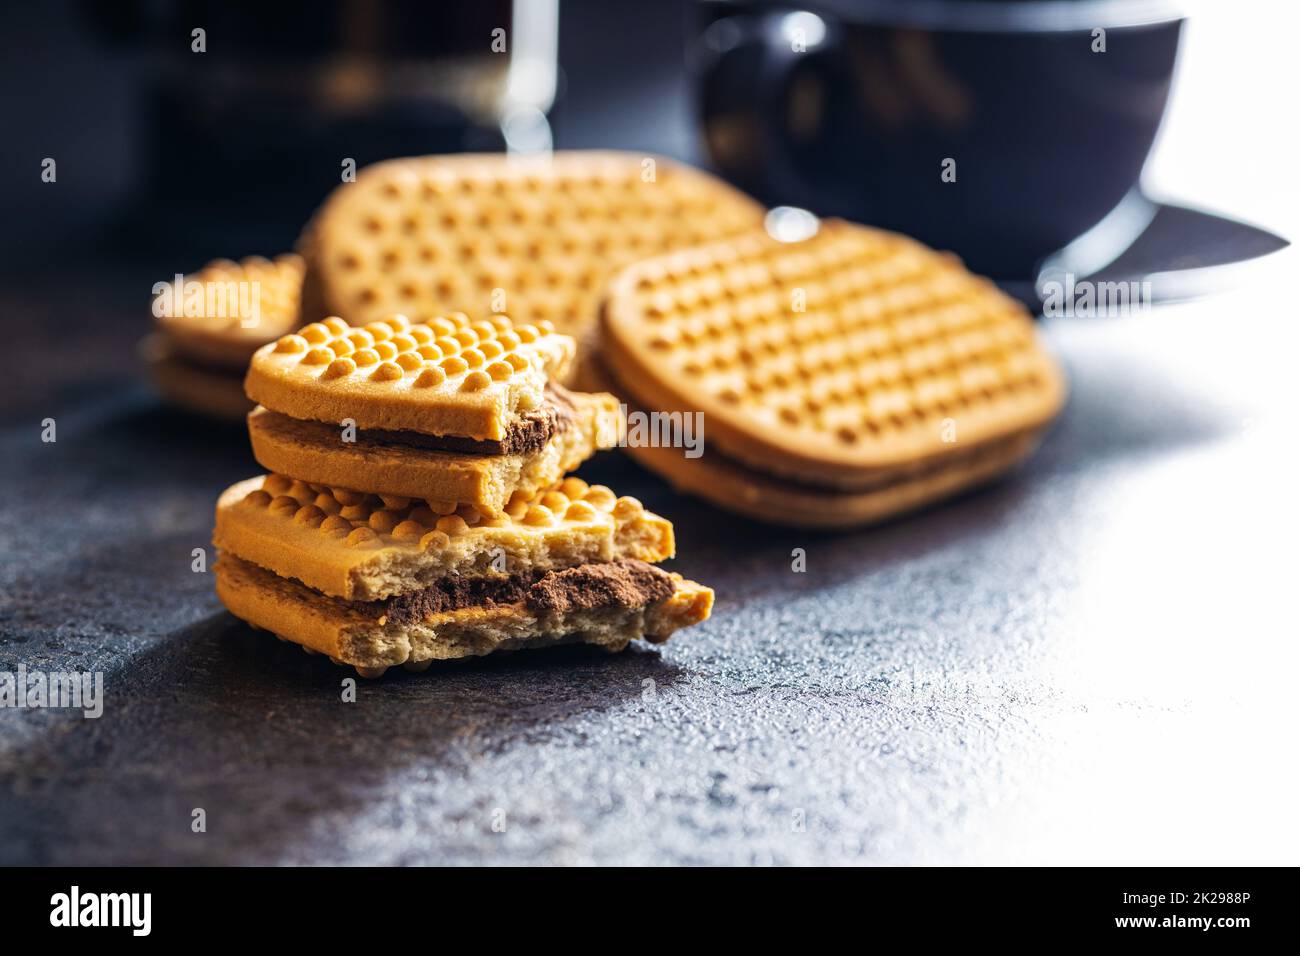 Sweet sandvich cookies. Biscuits with cocoa cream filling on kitchen table. Stock Photo